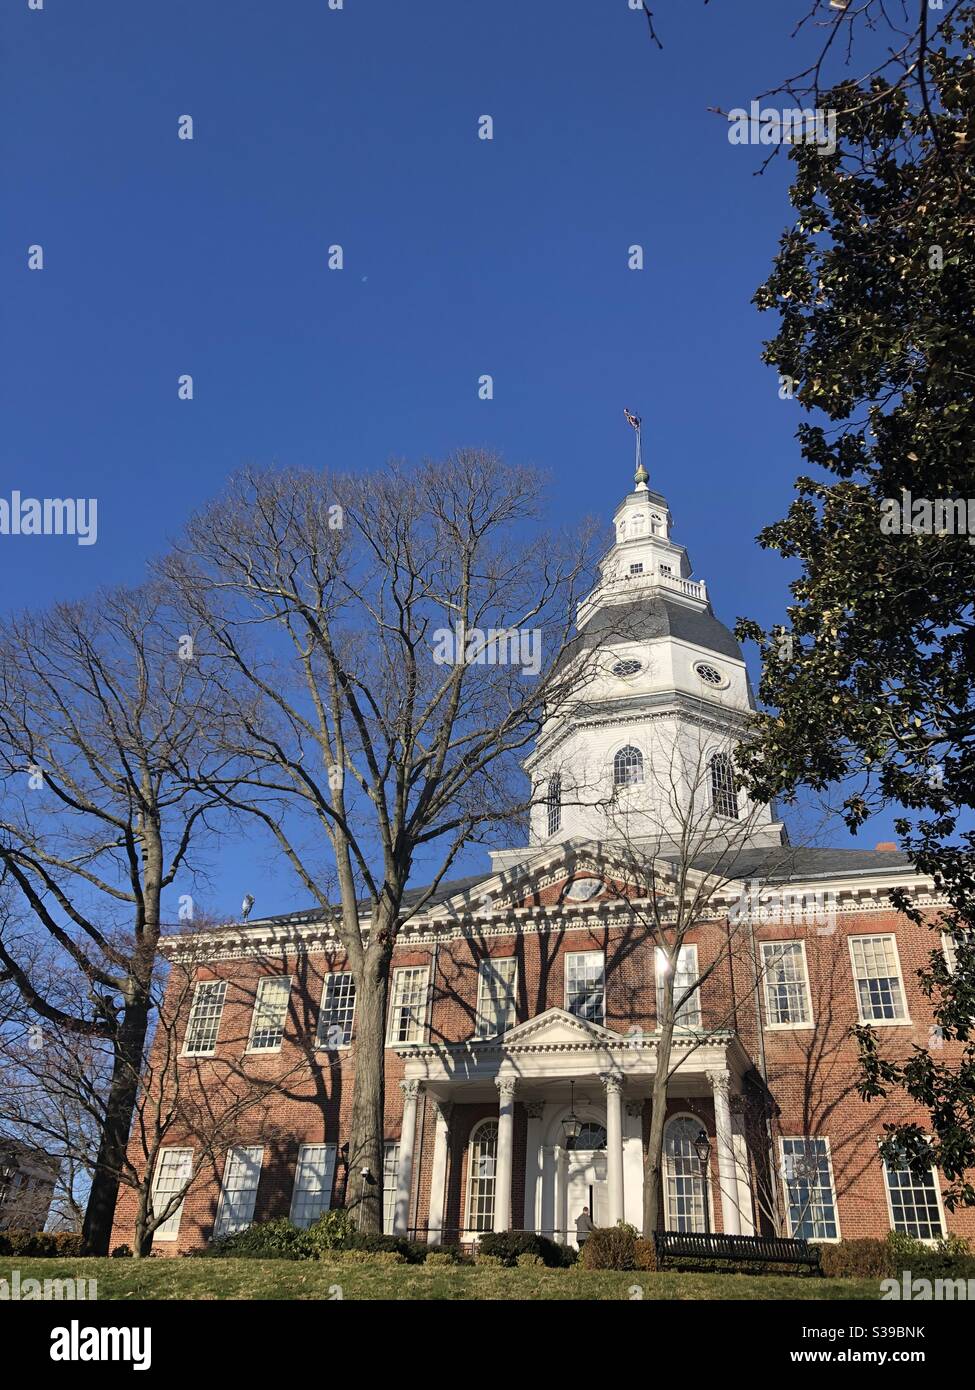 Maryland State House in Annapolis, Maryland Foto Stock